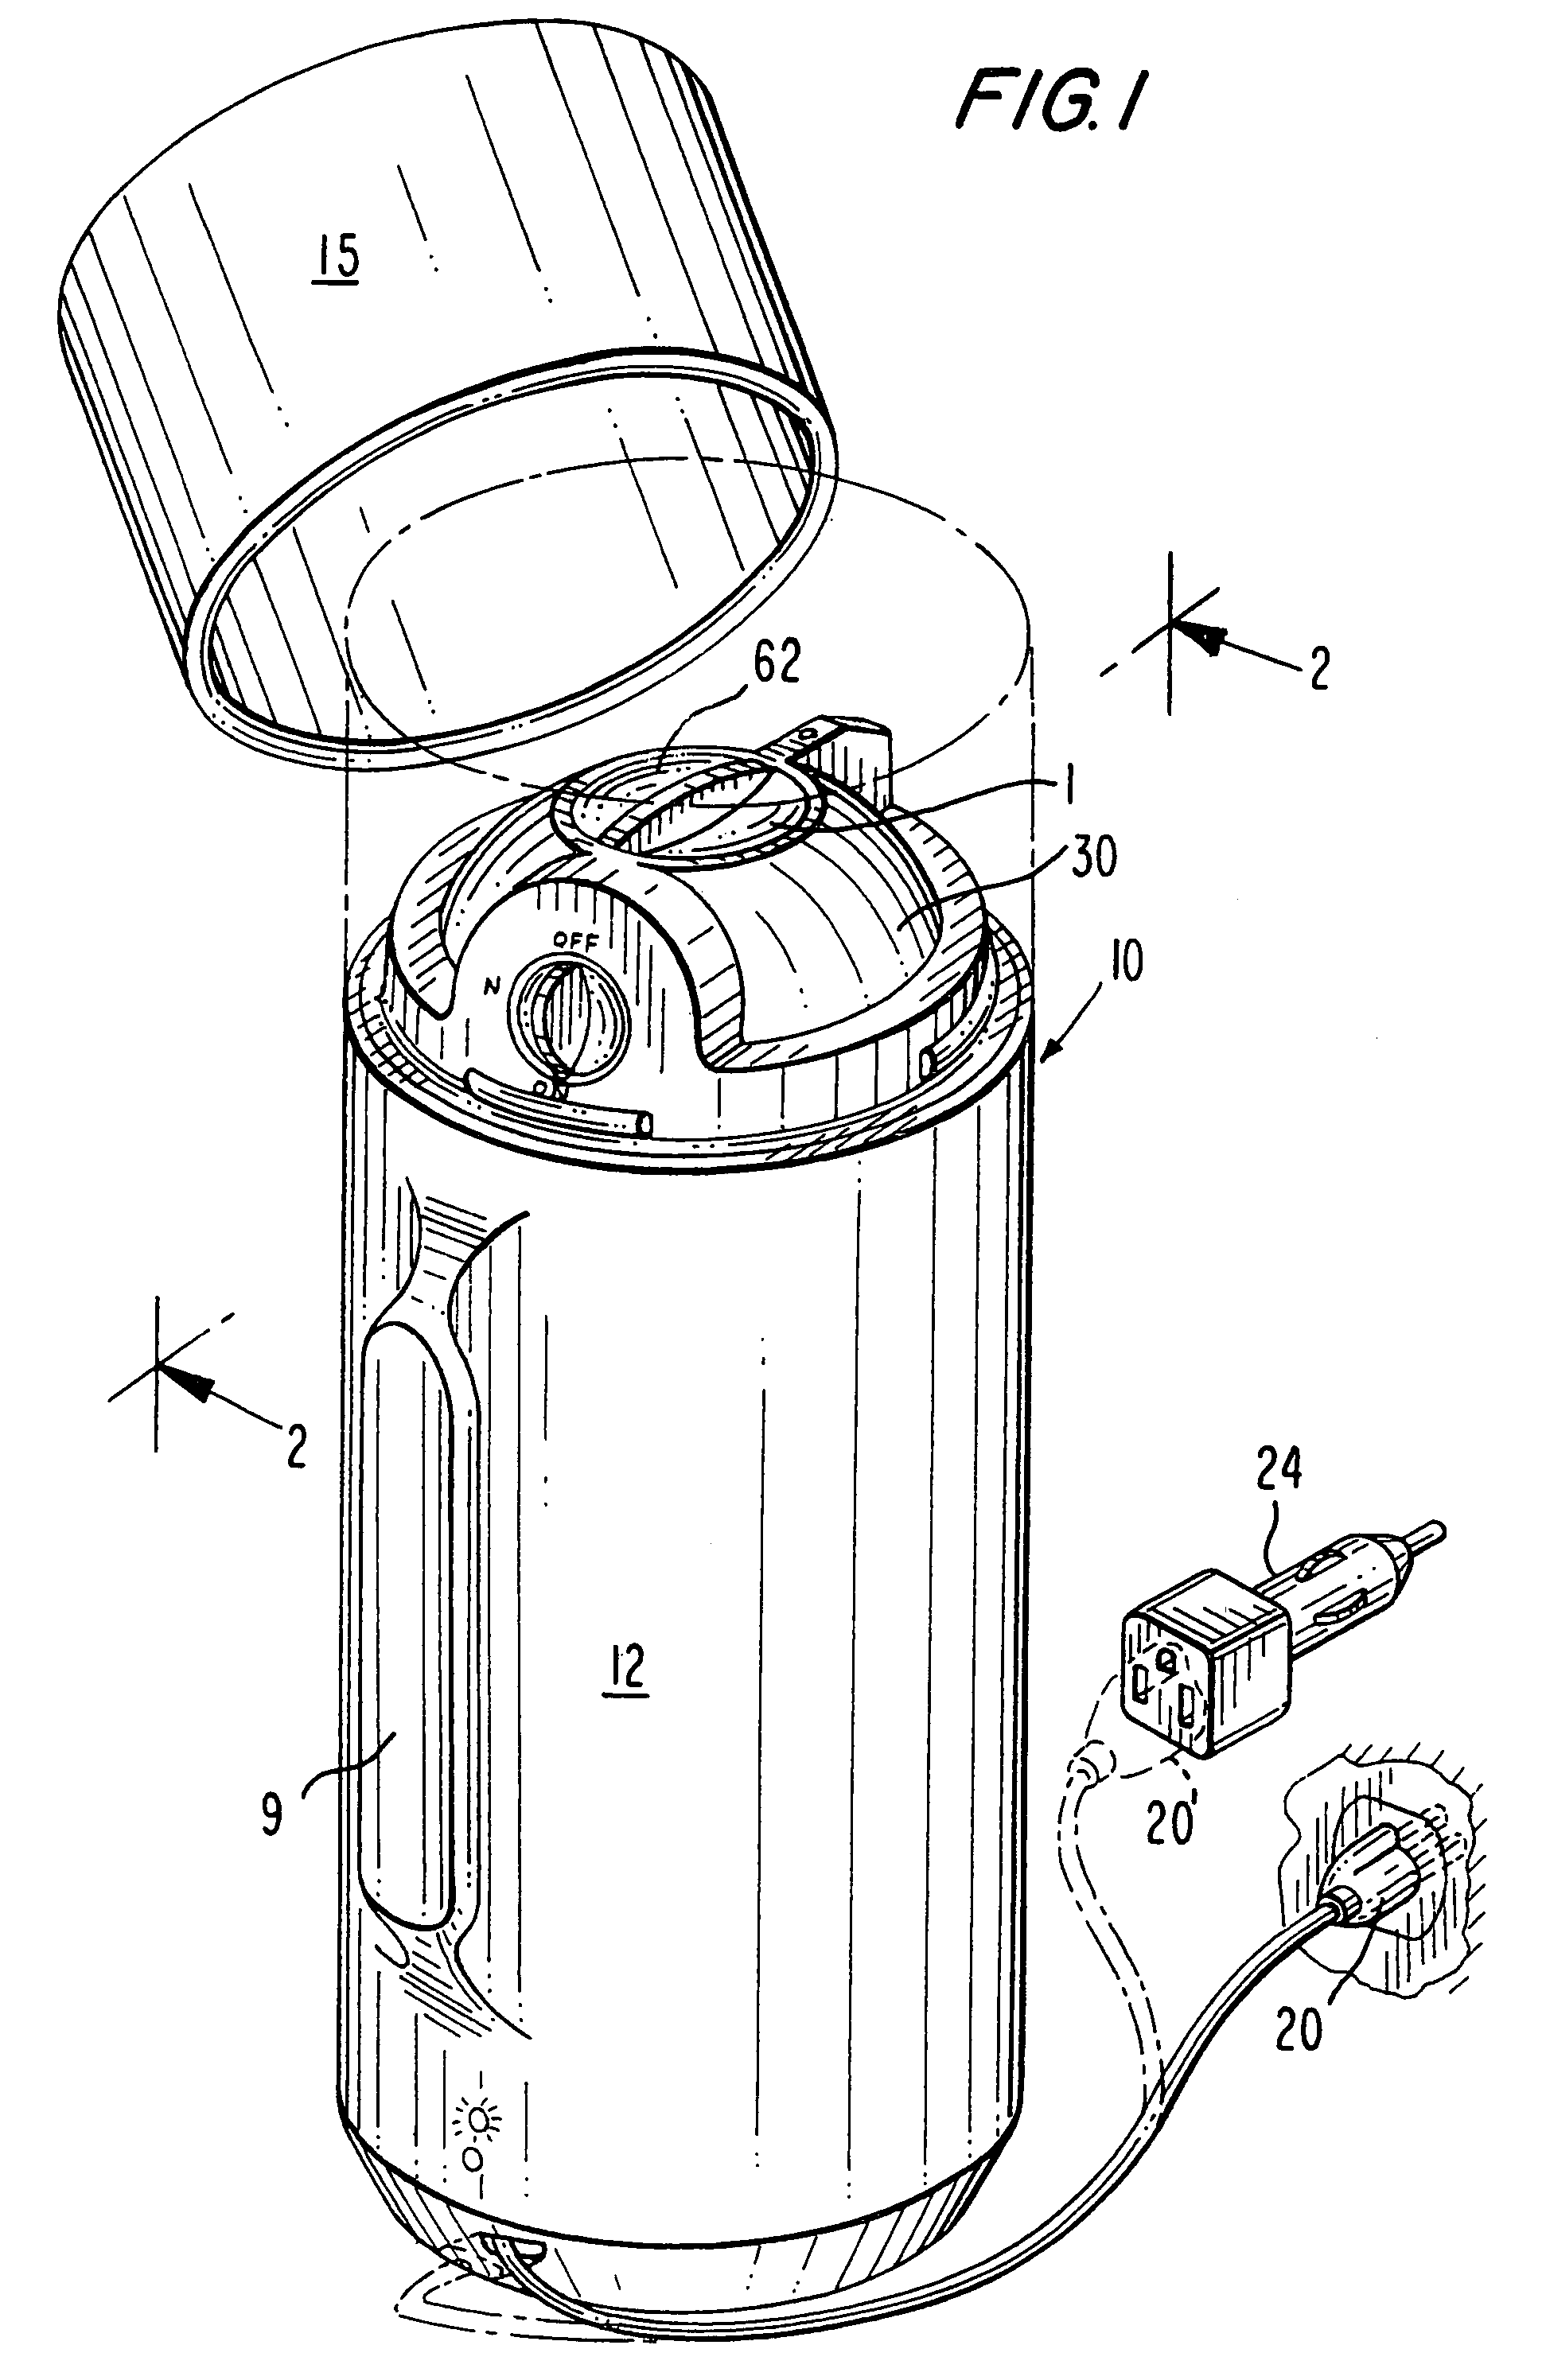 Apparatus for brewing beverages such as coffee and the like